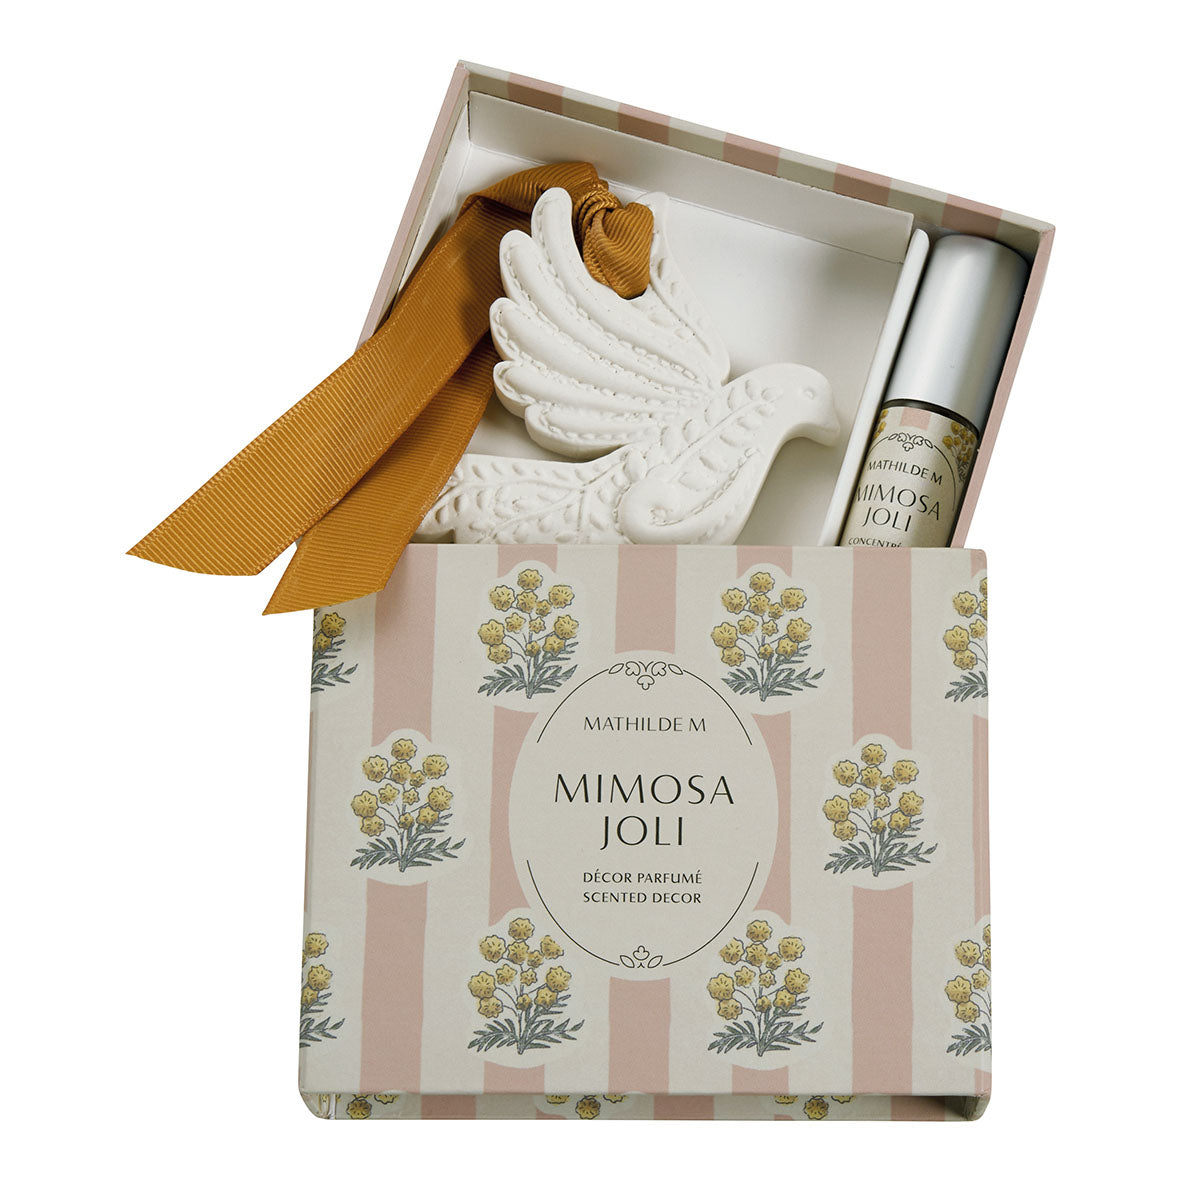 Mimosa scented detail set